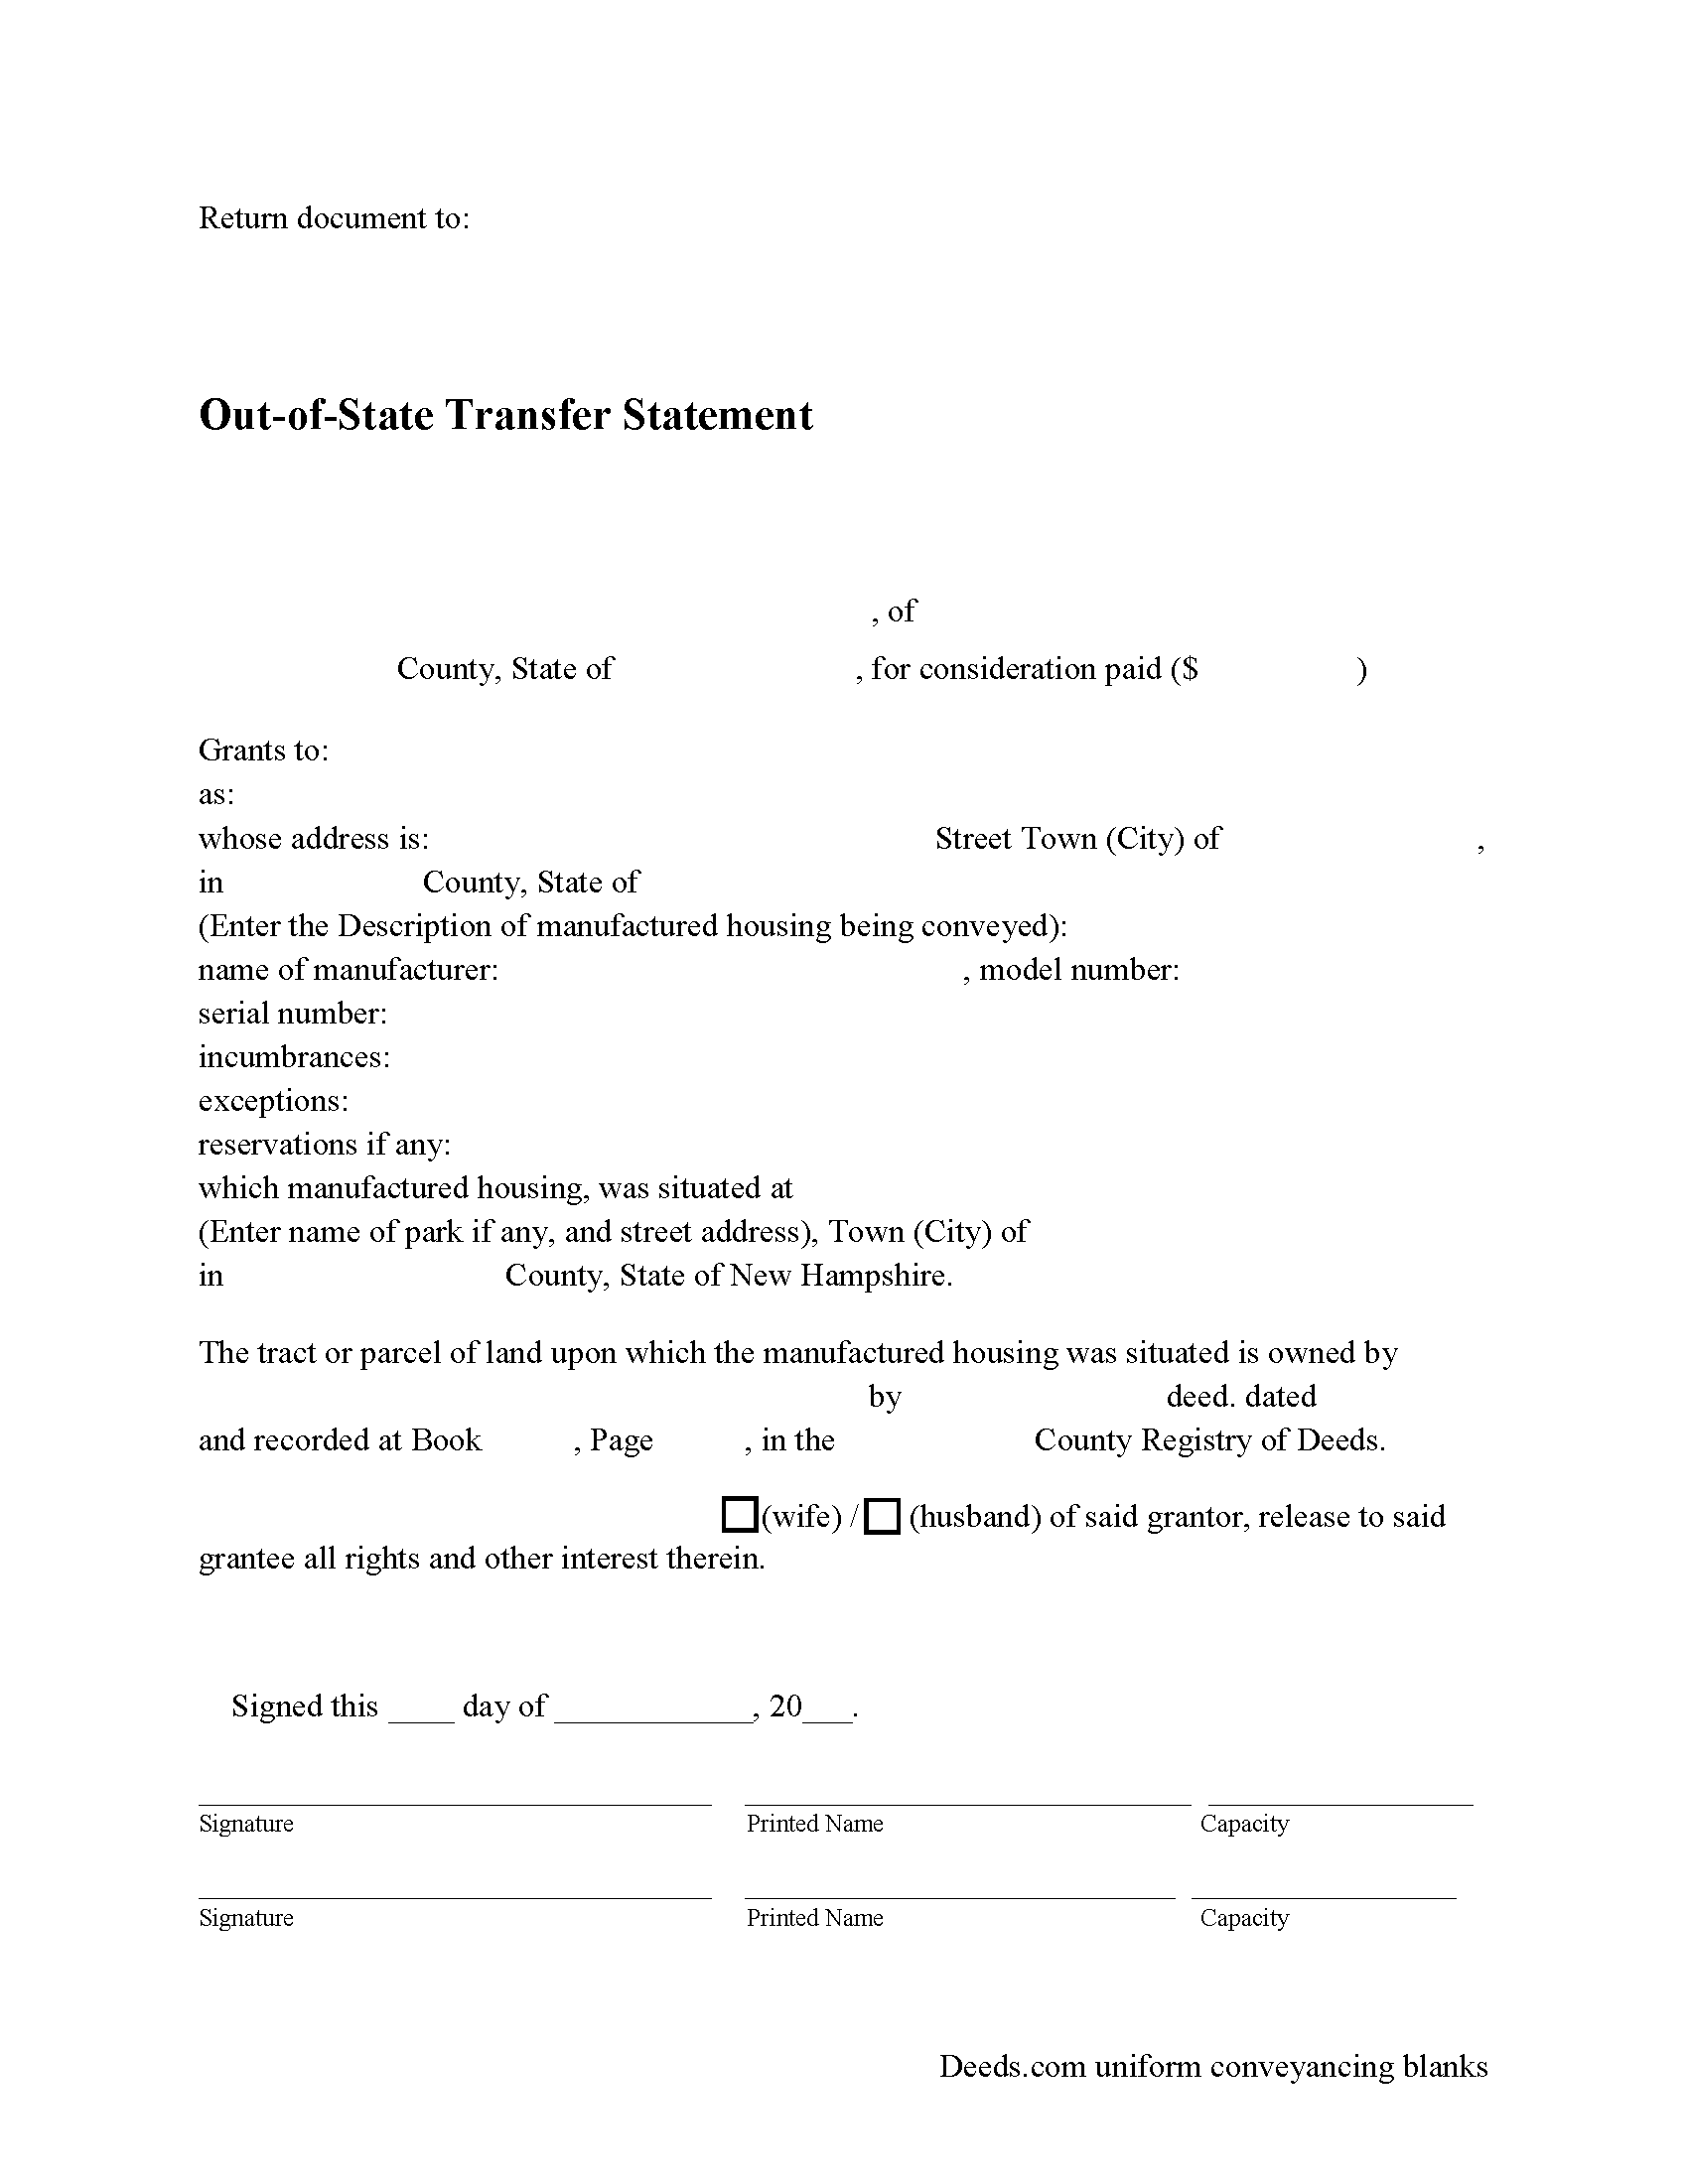 Out of State Transfer Form